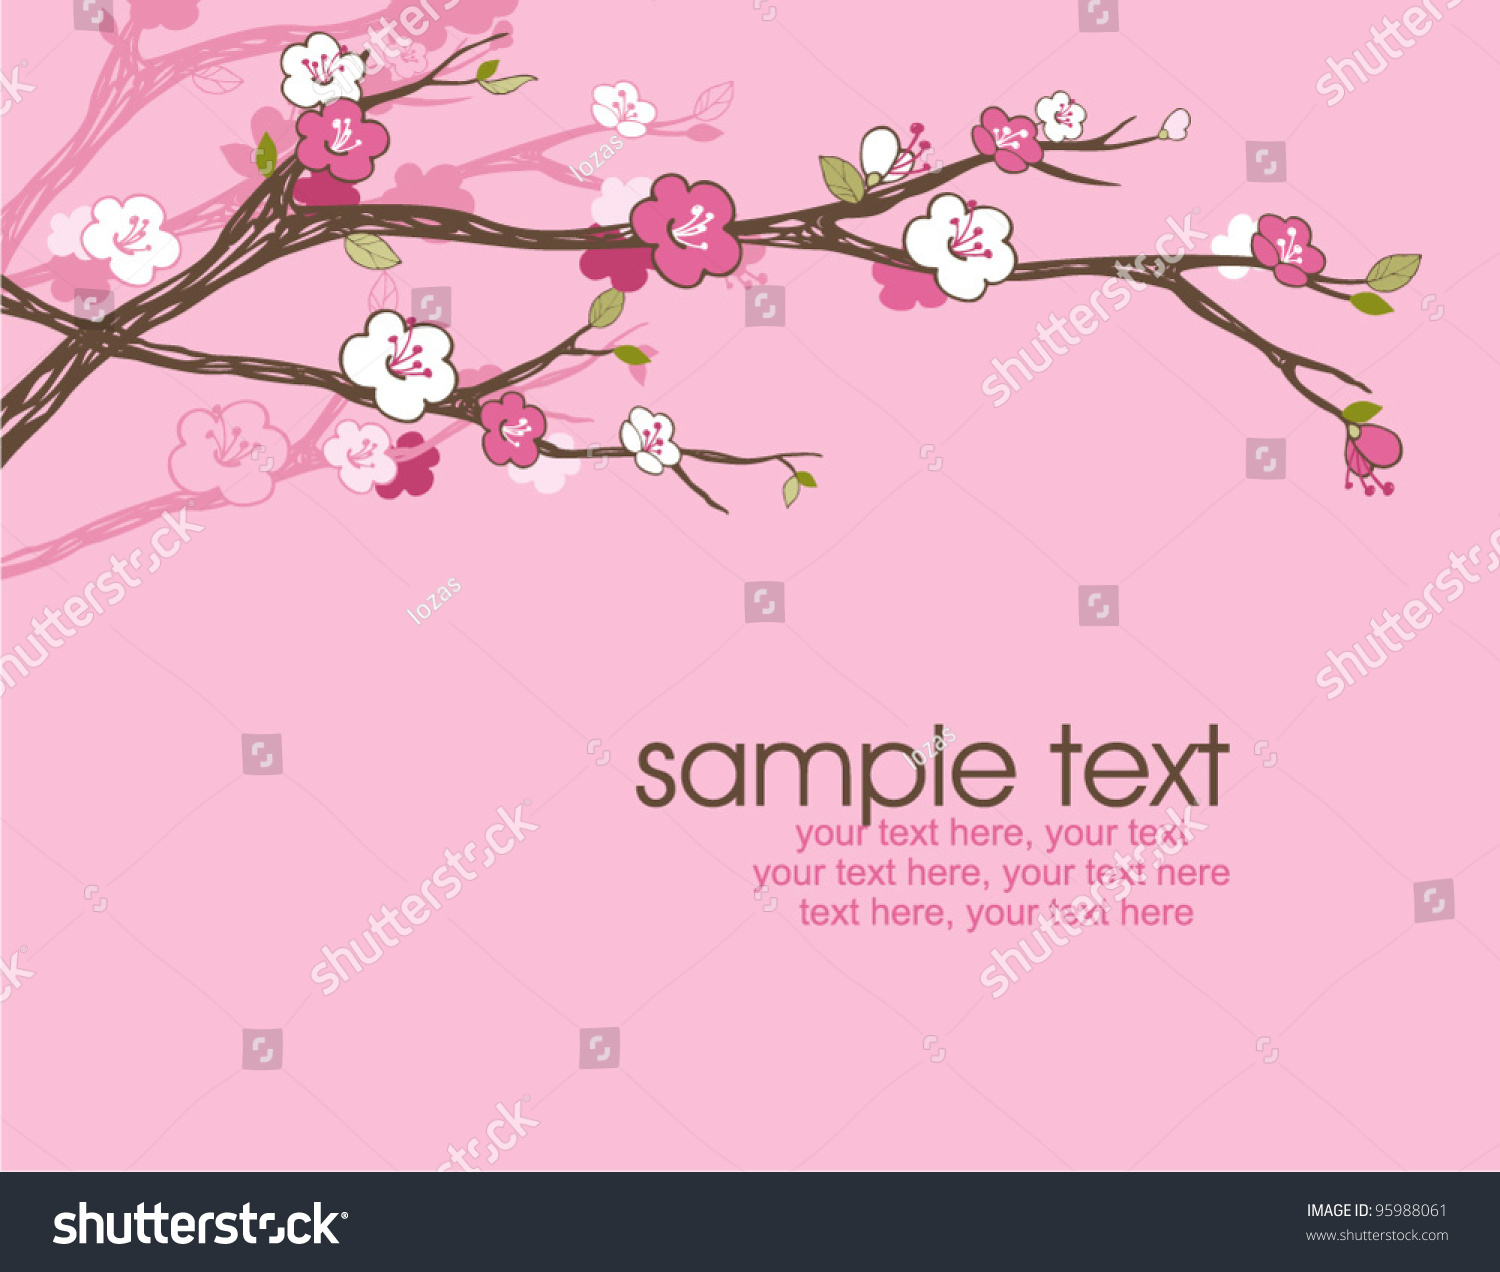 Card With Stylized Cherry Blossom And Text - Invitation For Party Or ...